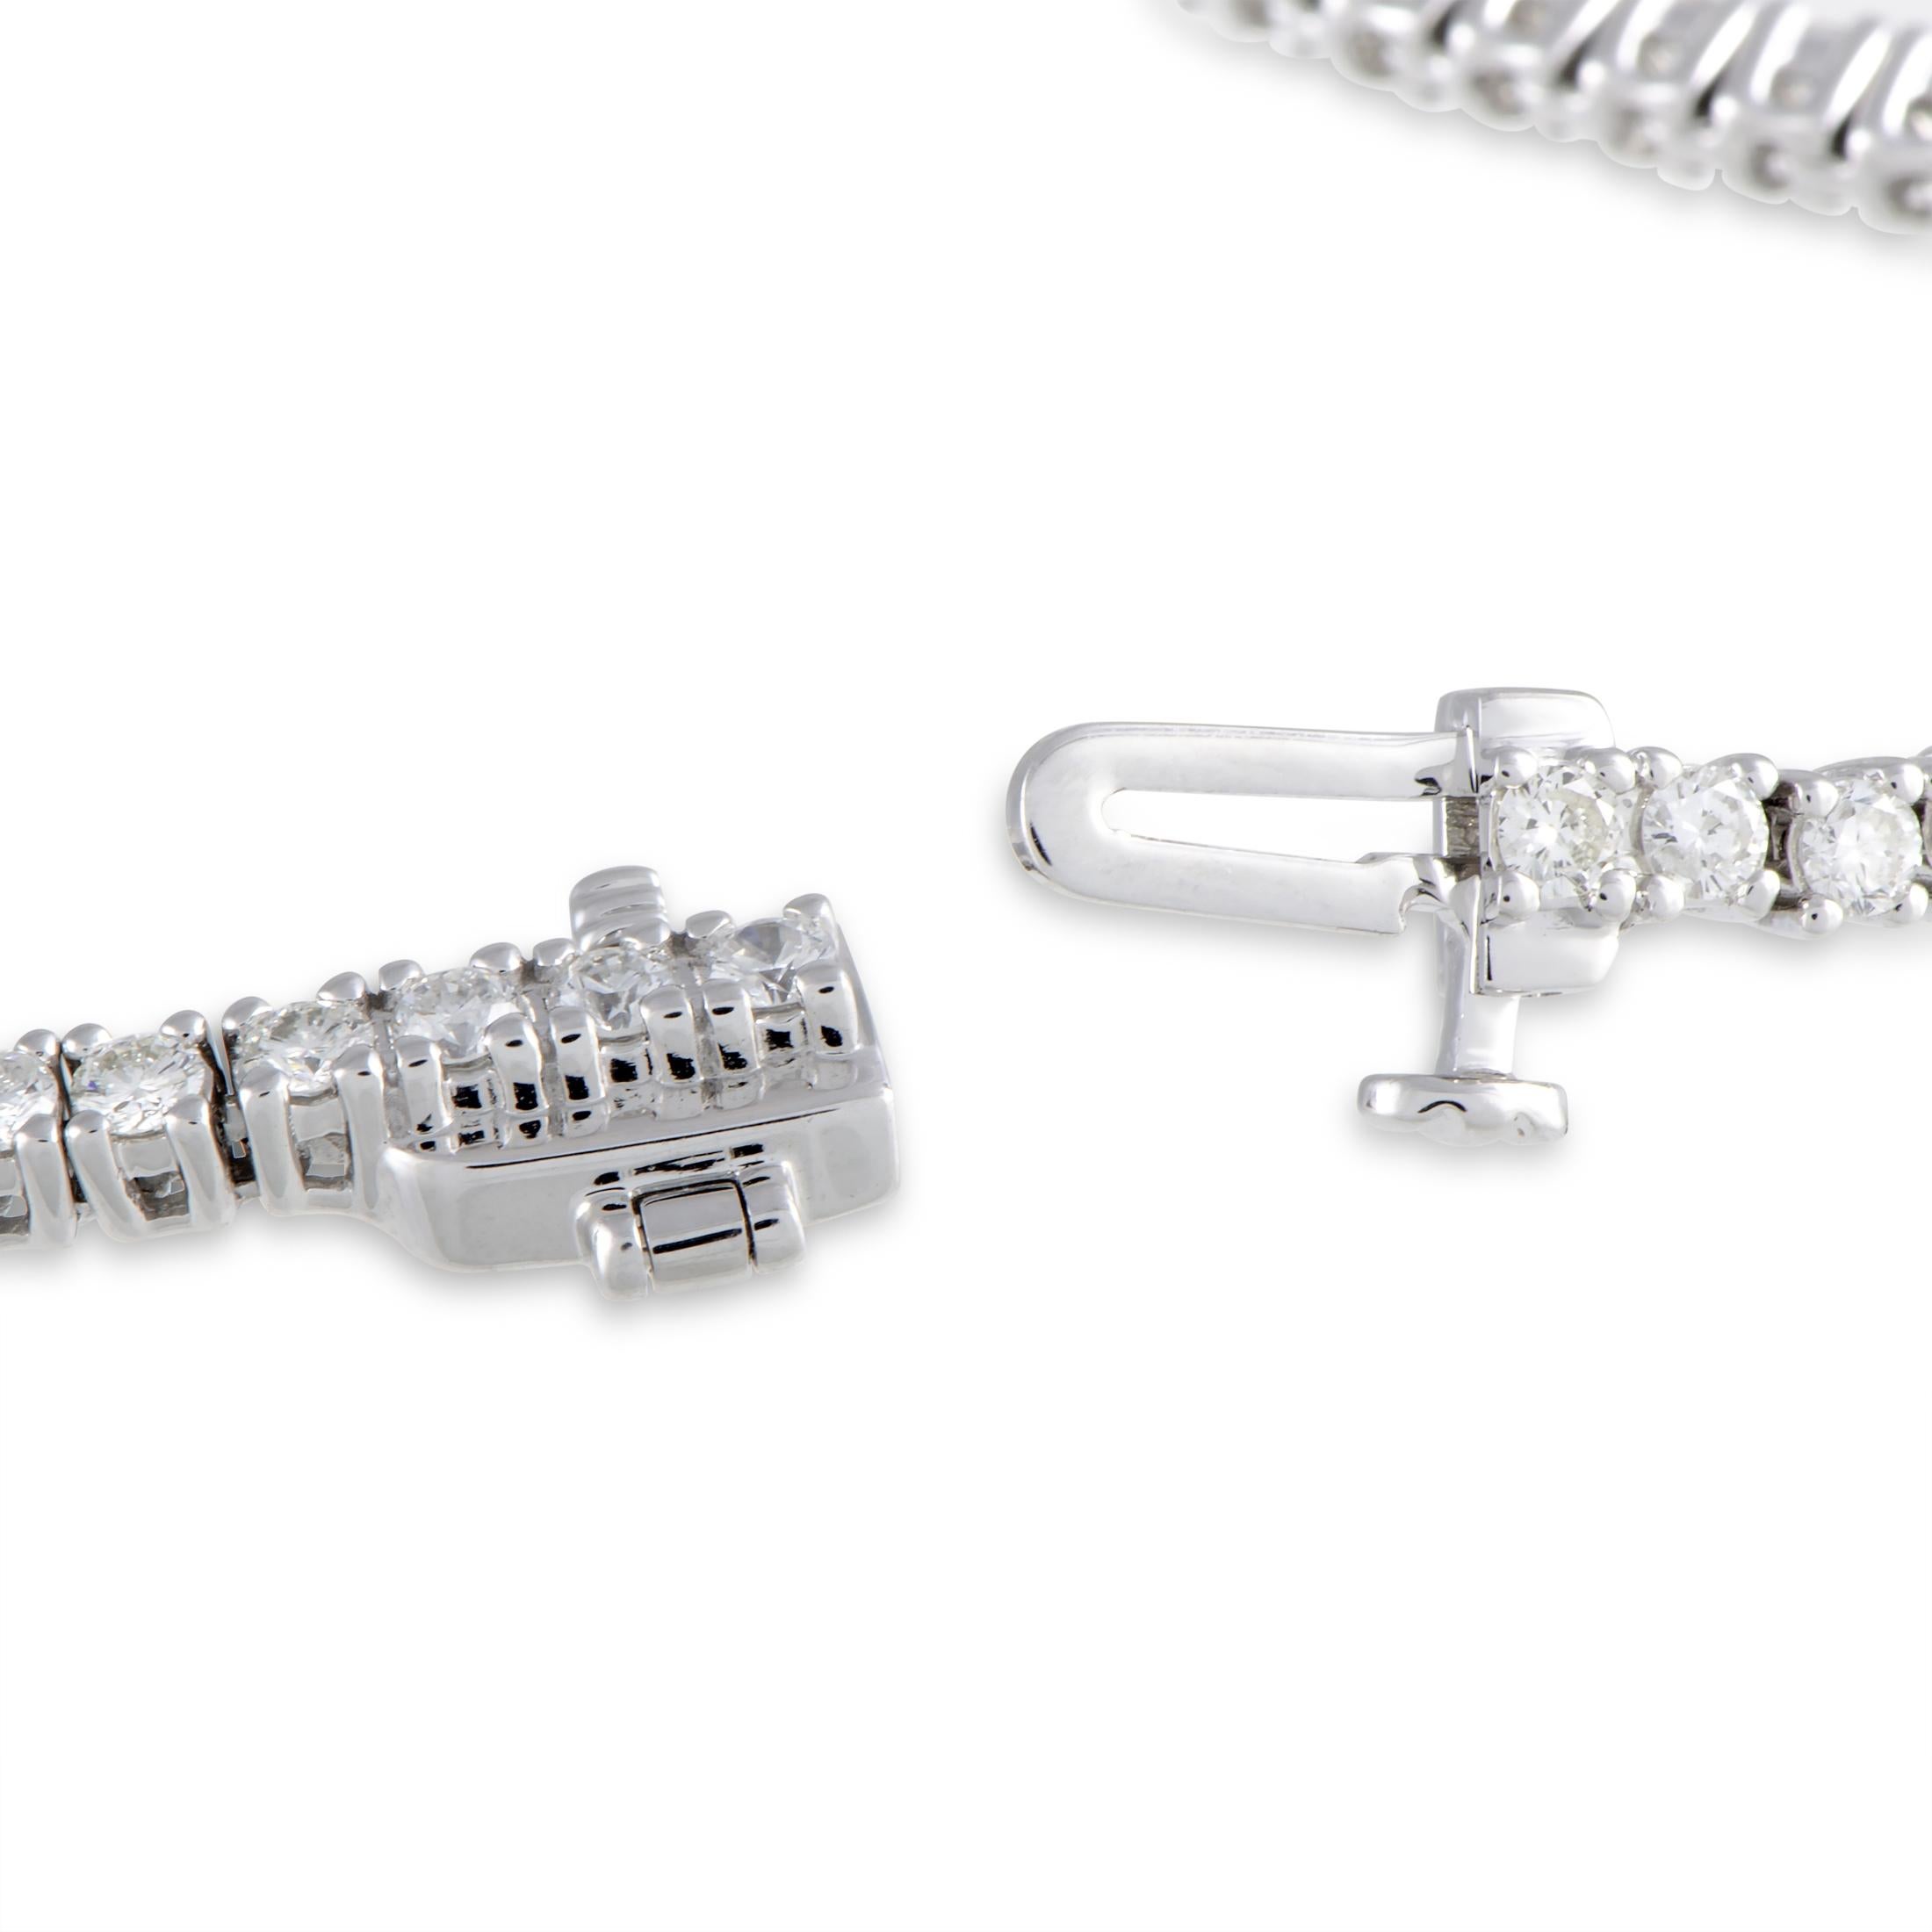 This tennis bracelet is made out of 14K white gold and diamonds that amount to 2.45 carats. The bracelet weighs 7.9 grams and measures 7.00” in length.
 
 Offered in brand new condition, this item includes a gift box.
